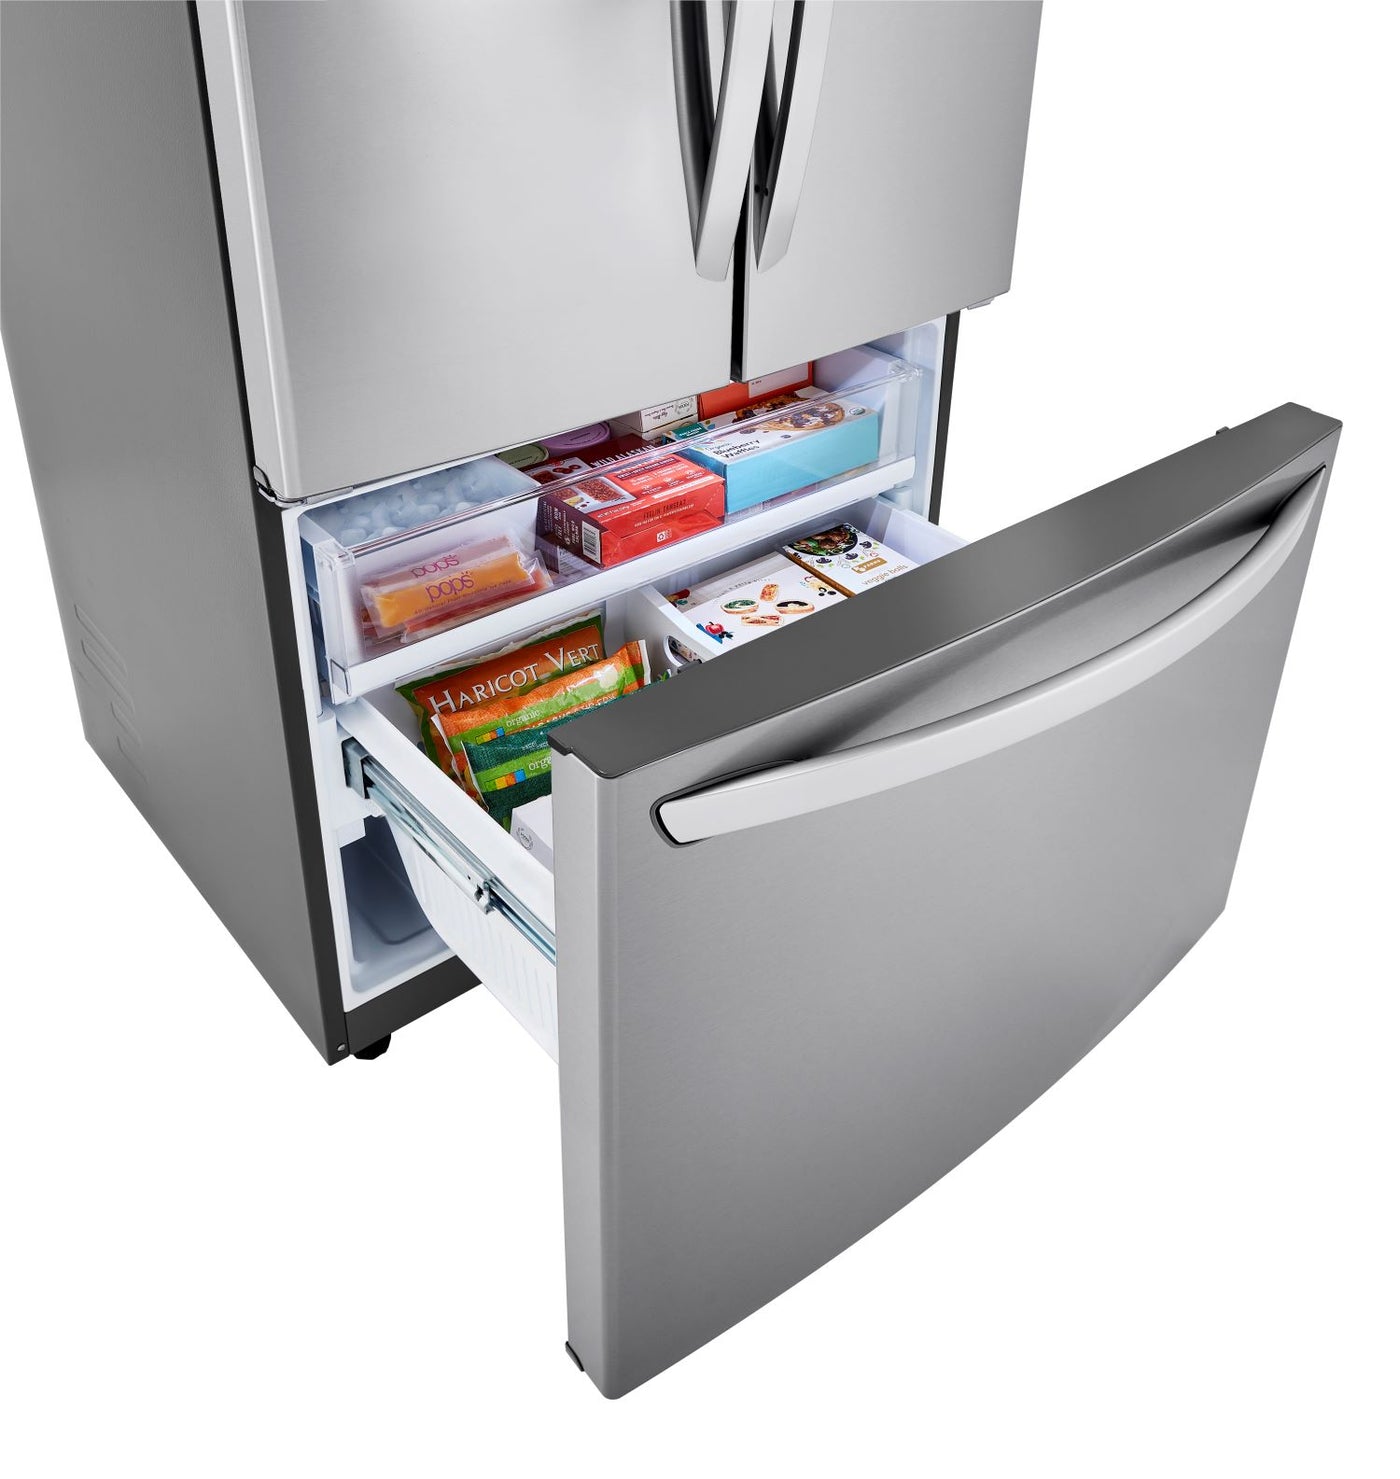 LG Stainless Steel Smart French Door Refrigerator (29 Cu. Ft) - LRFCS29D6S